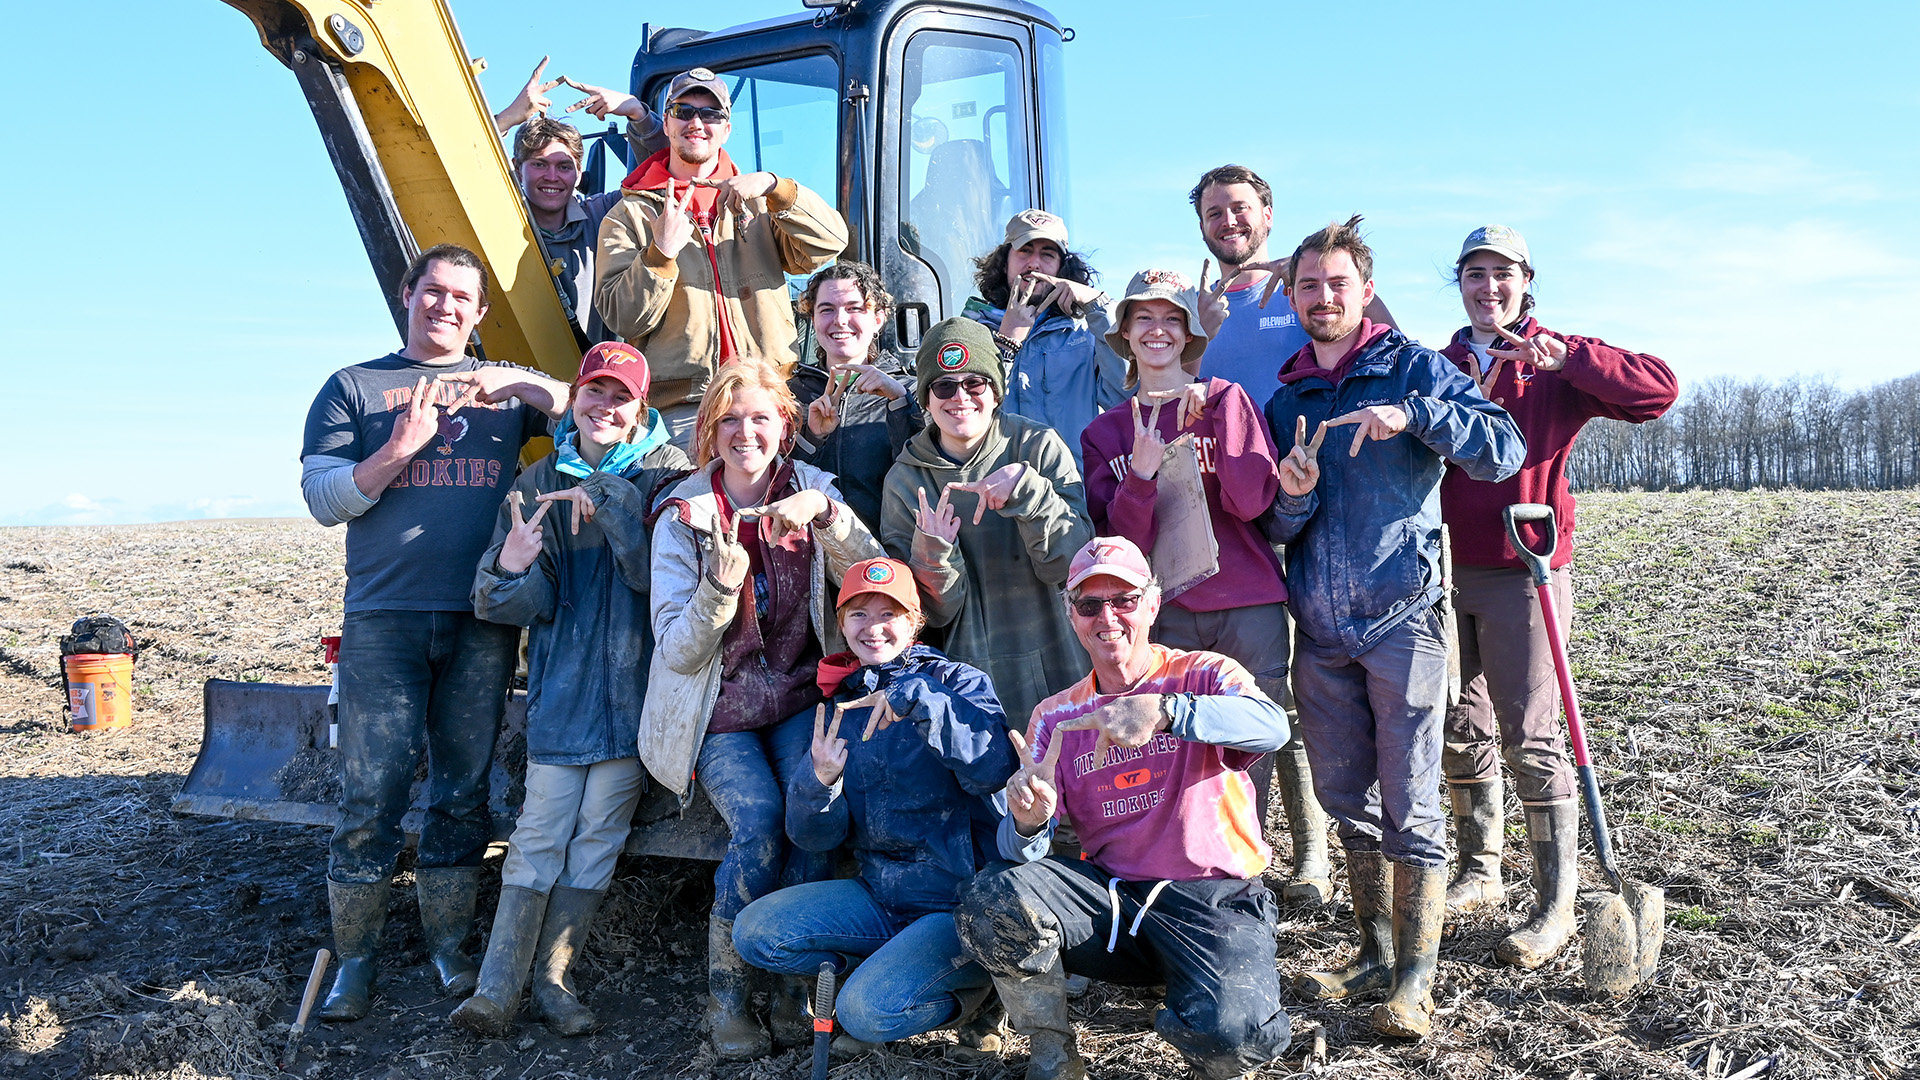 a group of fourteen people gathered in front of a backhoe machine, smiling at the camera with their clothes covered in soil